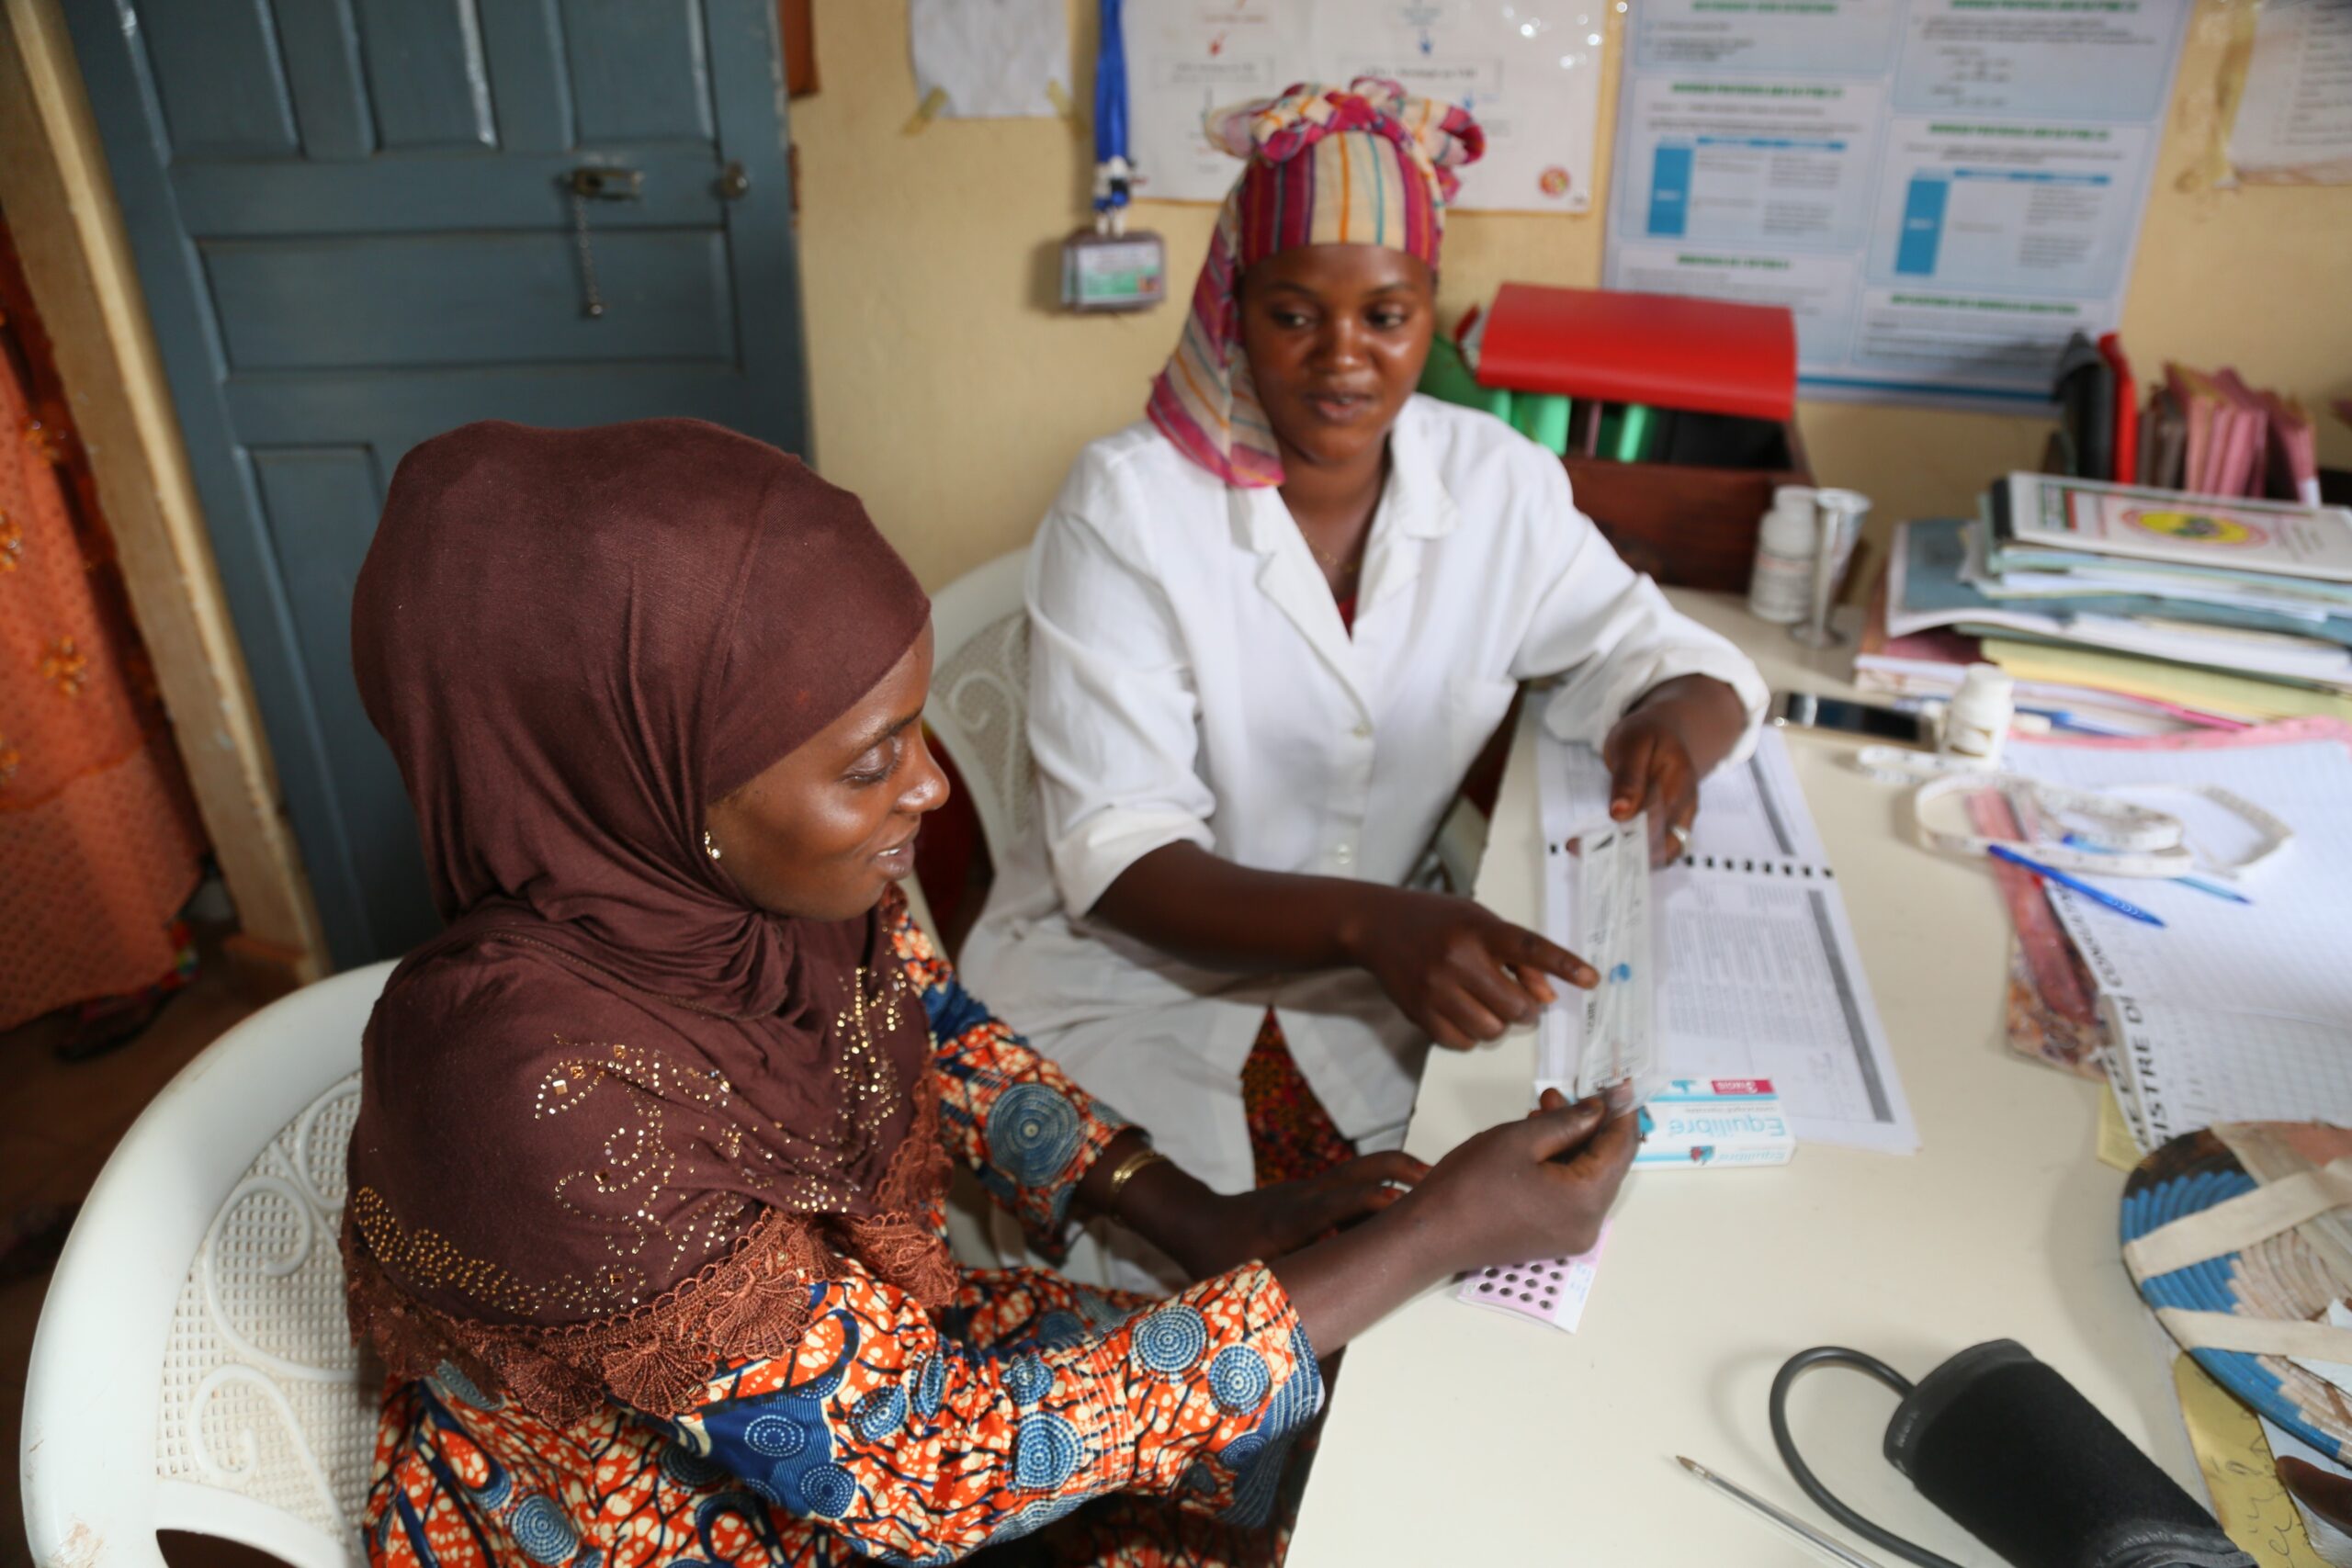 A female pharmacist sitting with a female patient during a family planning counseling session. The pharmacist is explaining the use of a device to the patient.